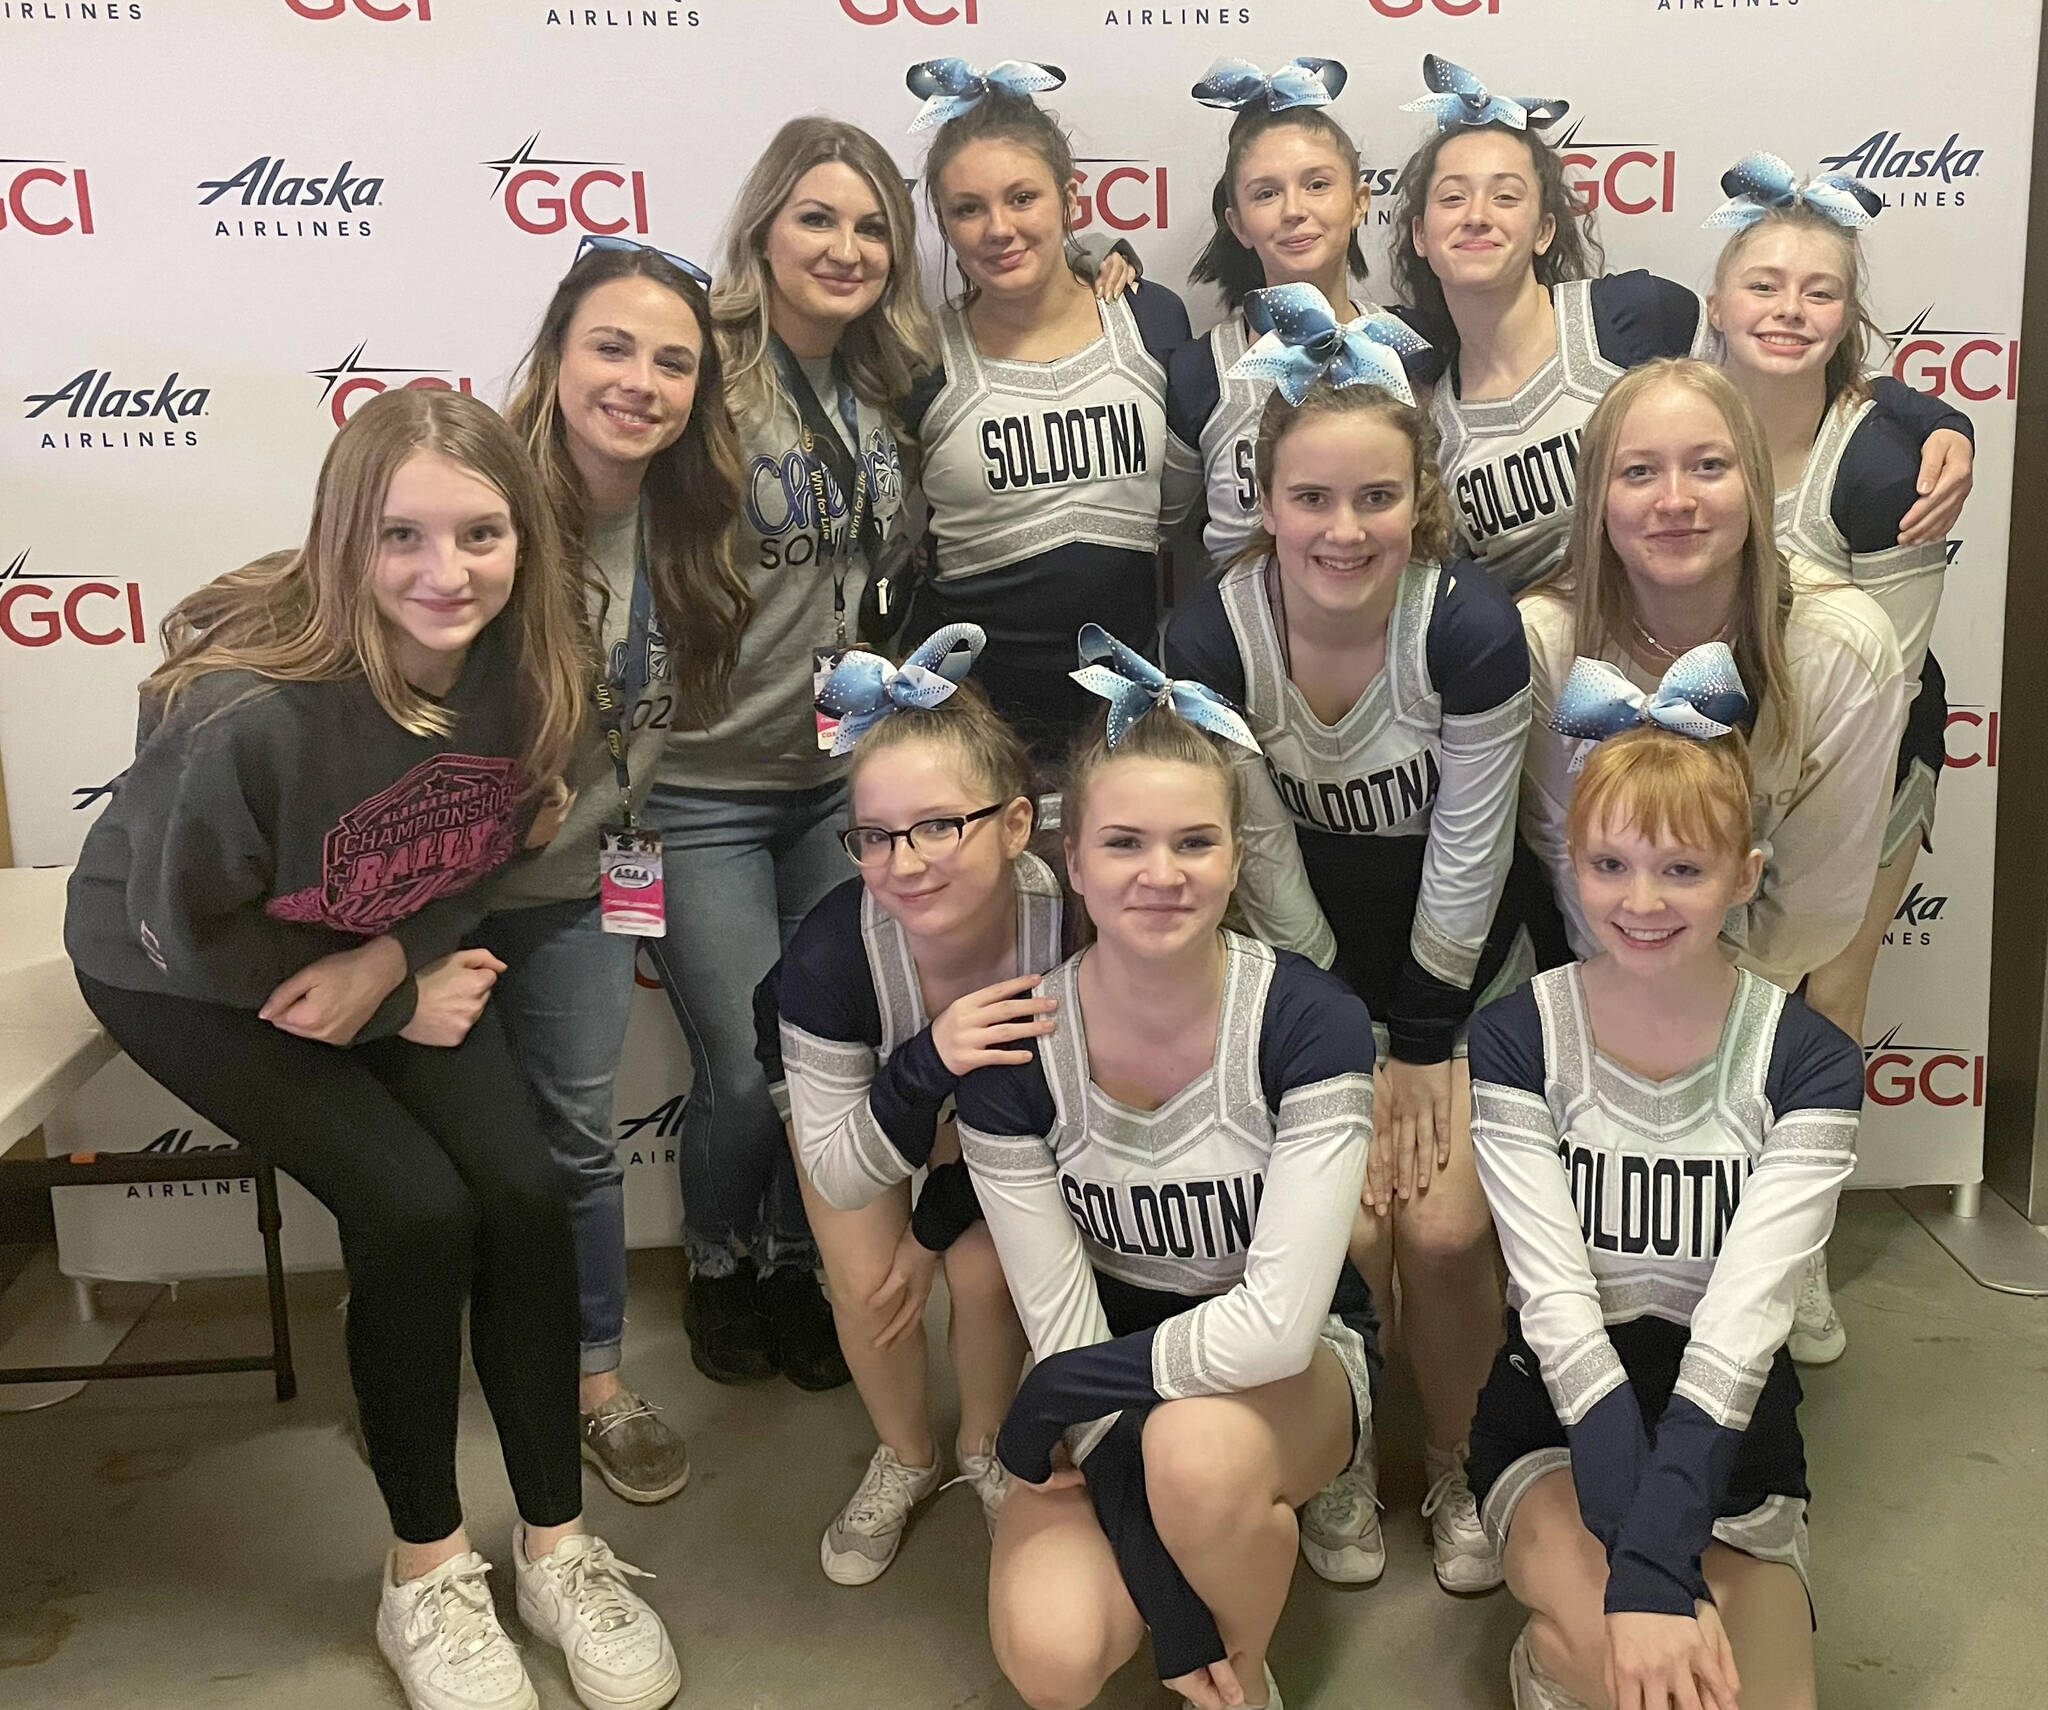 The Soldotna cheerleading squad. Top row, left to right: Olivia Hays, head coach Jayda Williams, assistant coach Lacie Kelly, Rylen Weed, Elizabeth Garcia, Adele Tacey and Savannah Hawkins. Middle row, left to right: Angelina Beck, Lacy Nye and Mazzy Bundy. Bottom row, left to right: Lynzie Denbow and Hailey Stonecipher.